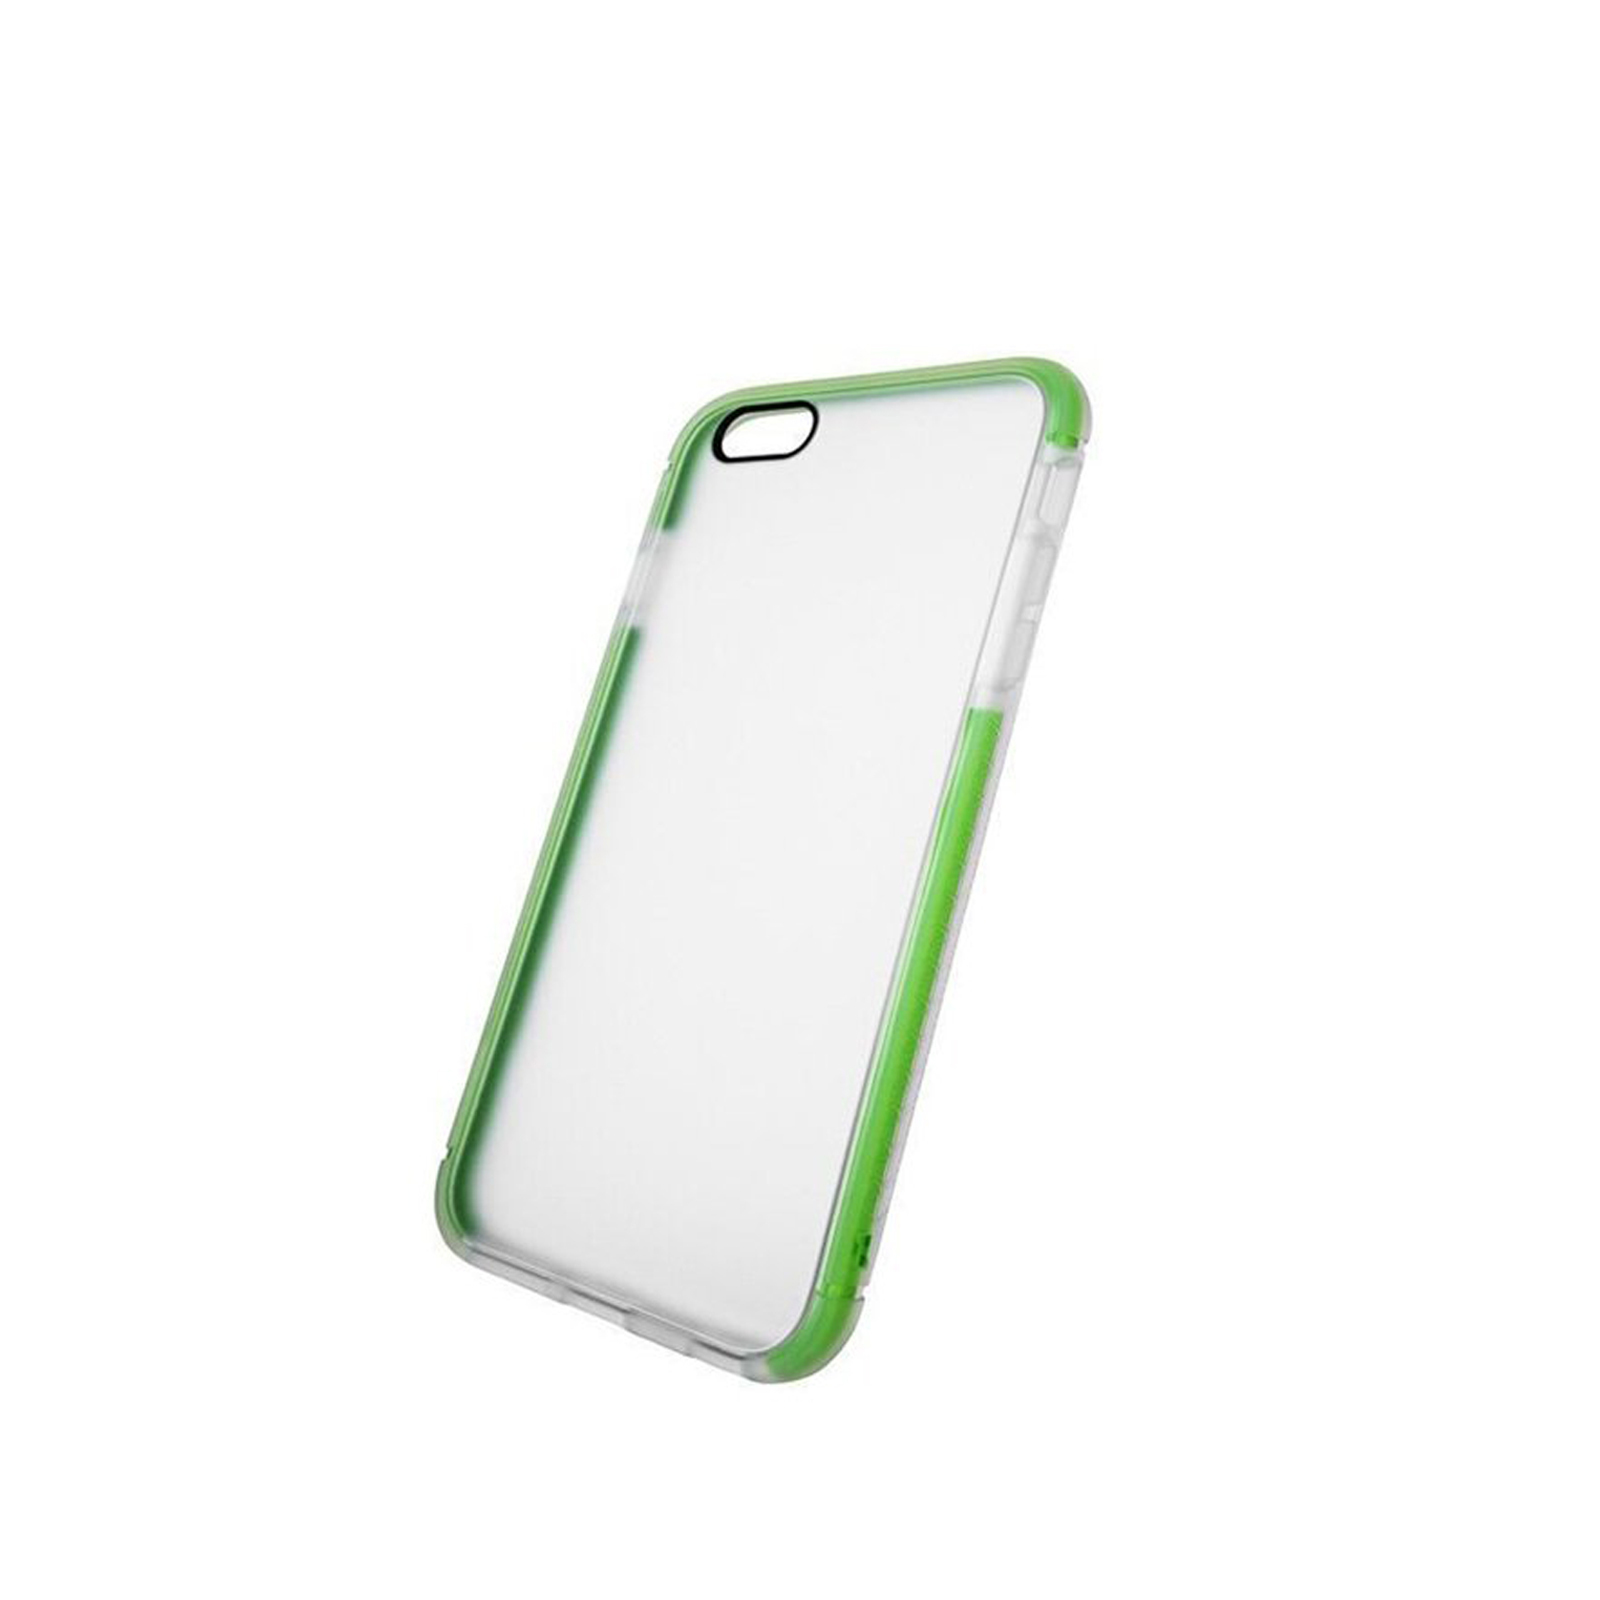 Contact iPhone 6 / 6S Case [Clear]